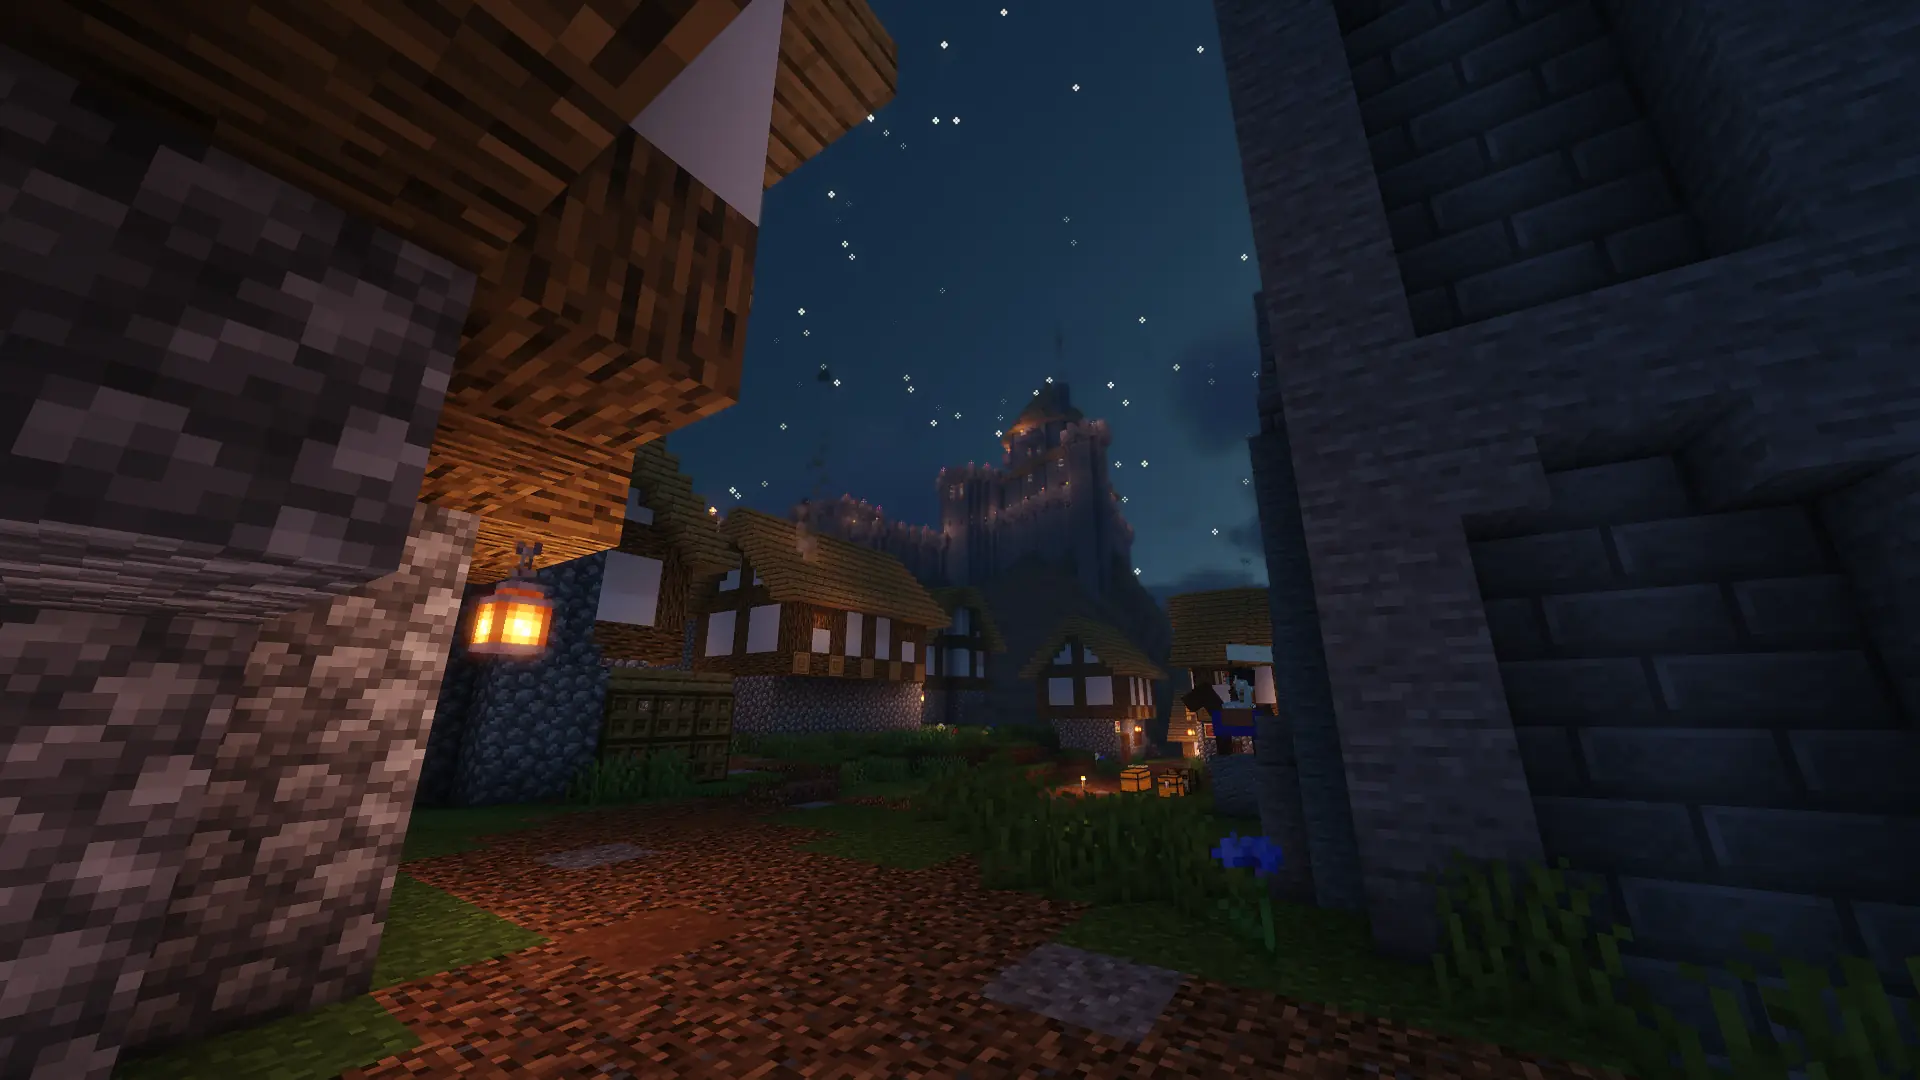 The castle seen from within the village at night